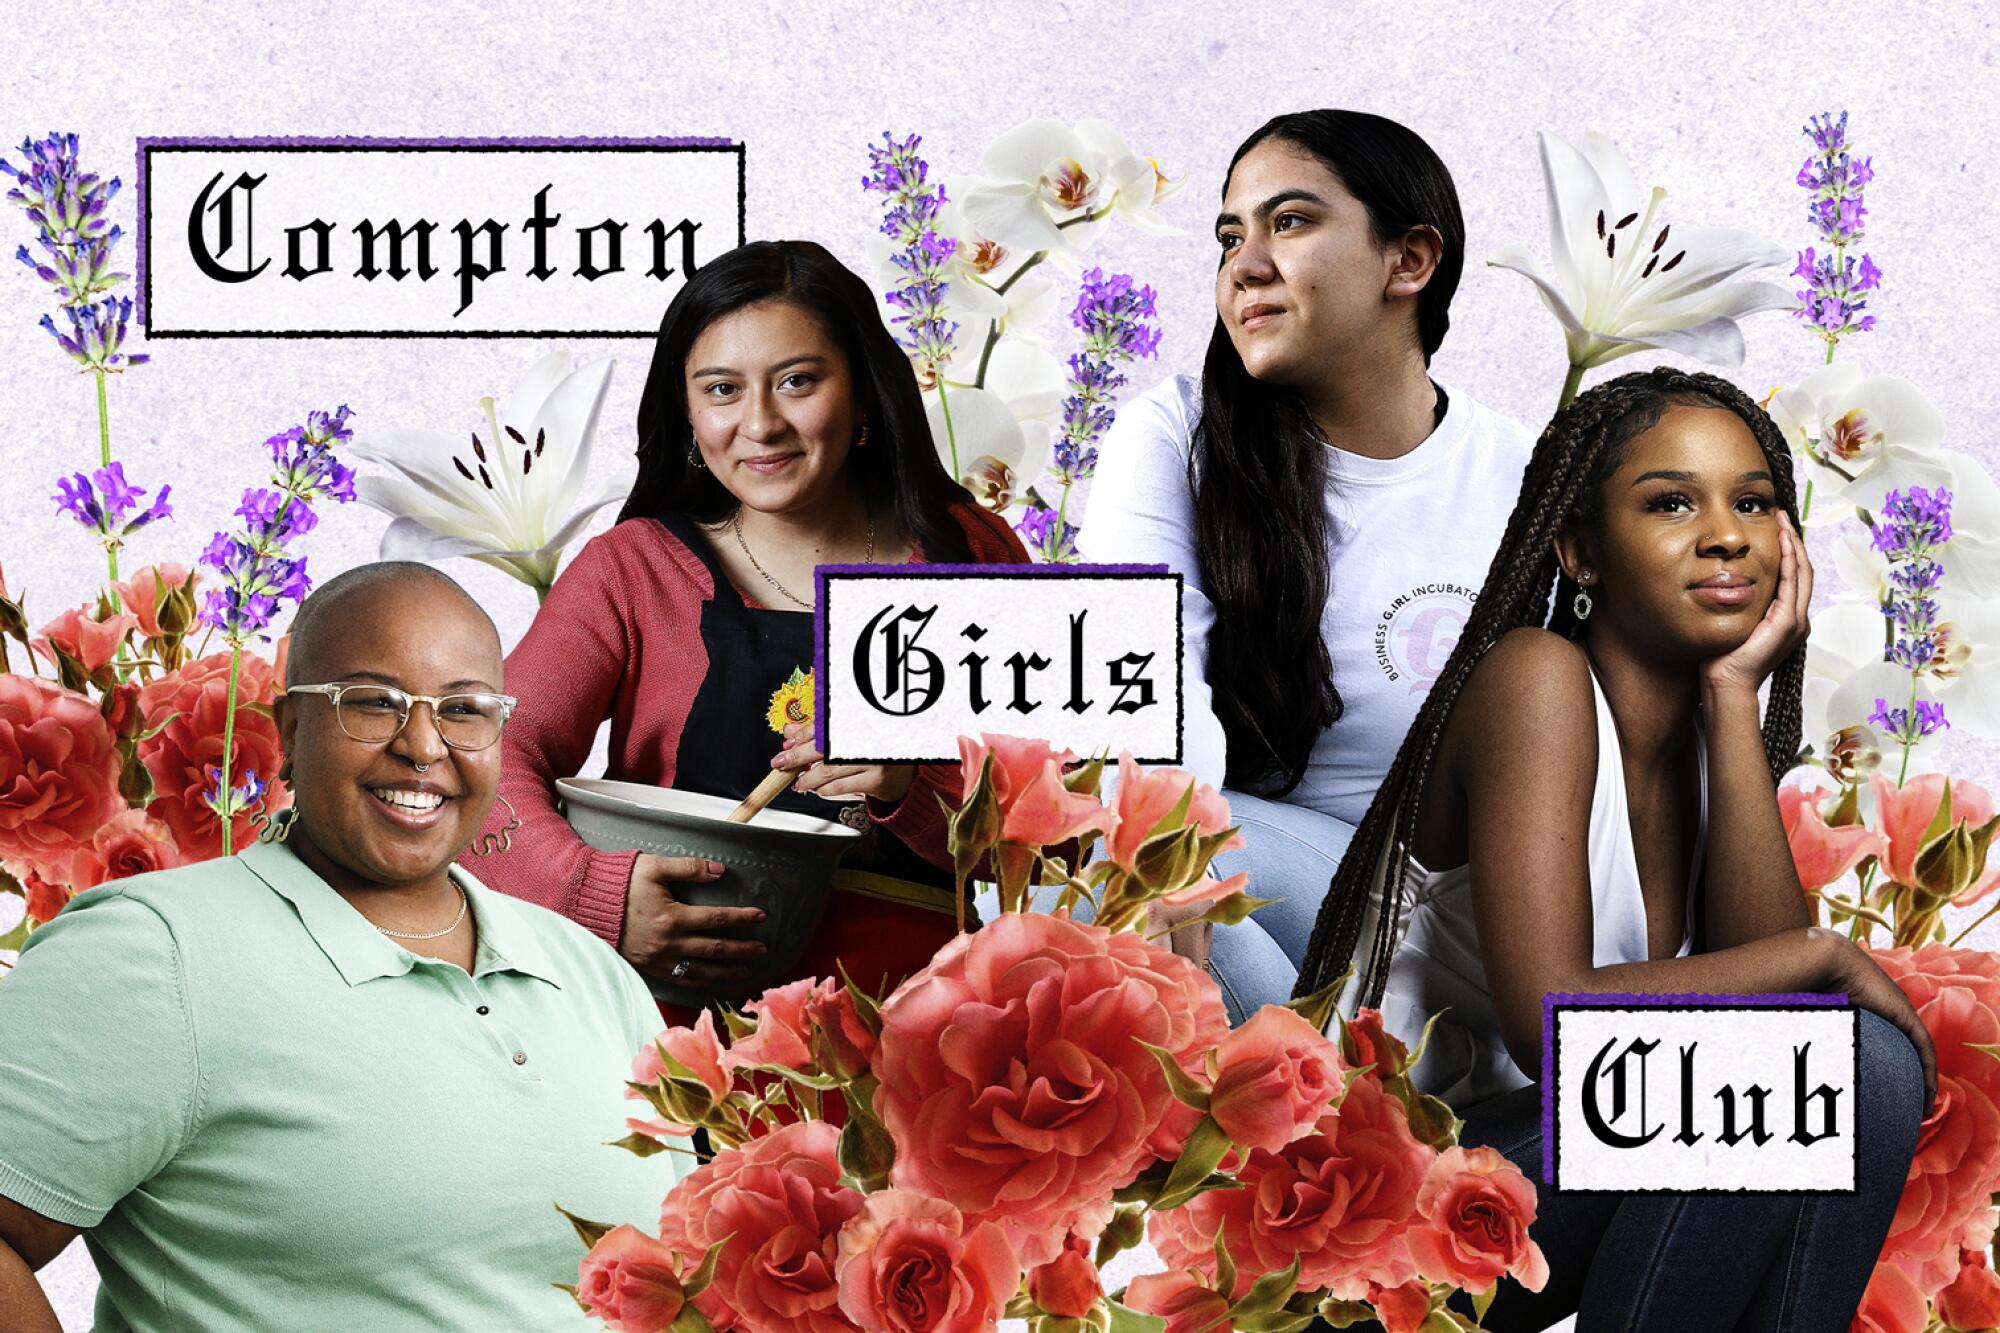 An illustration spotlighting the founder and three members of the Compton Girls Club.